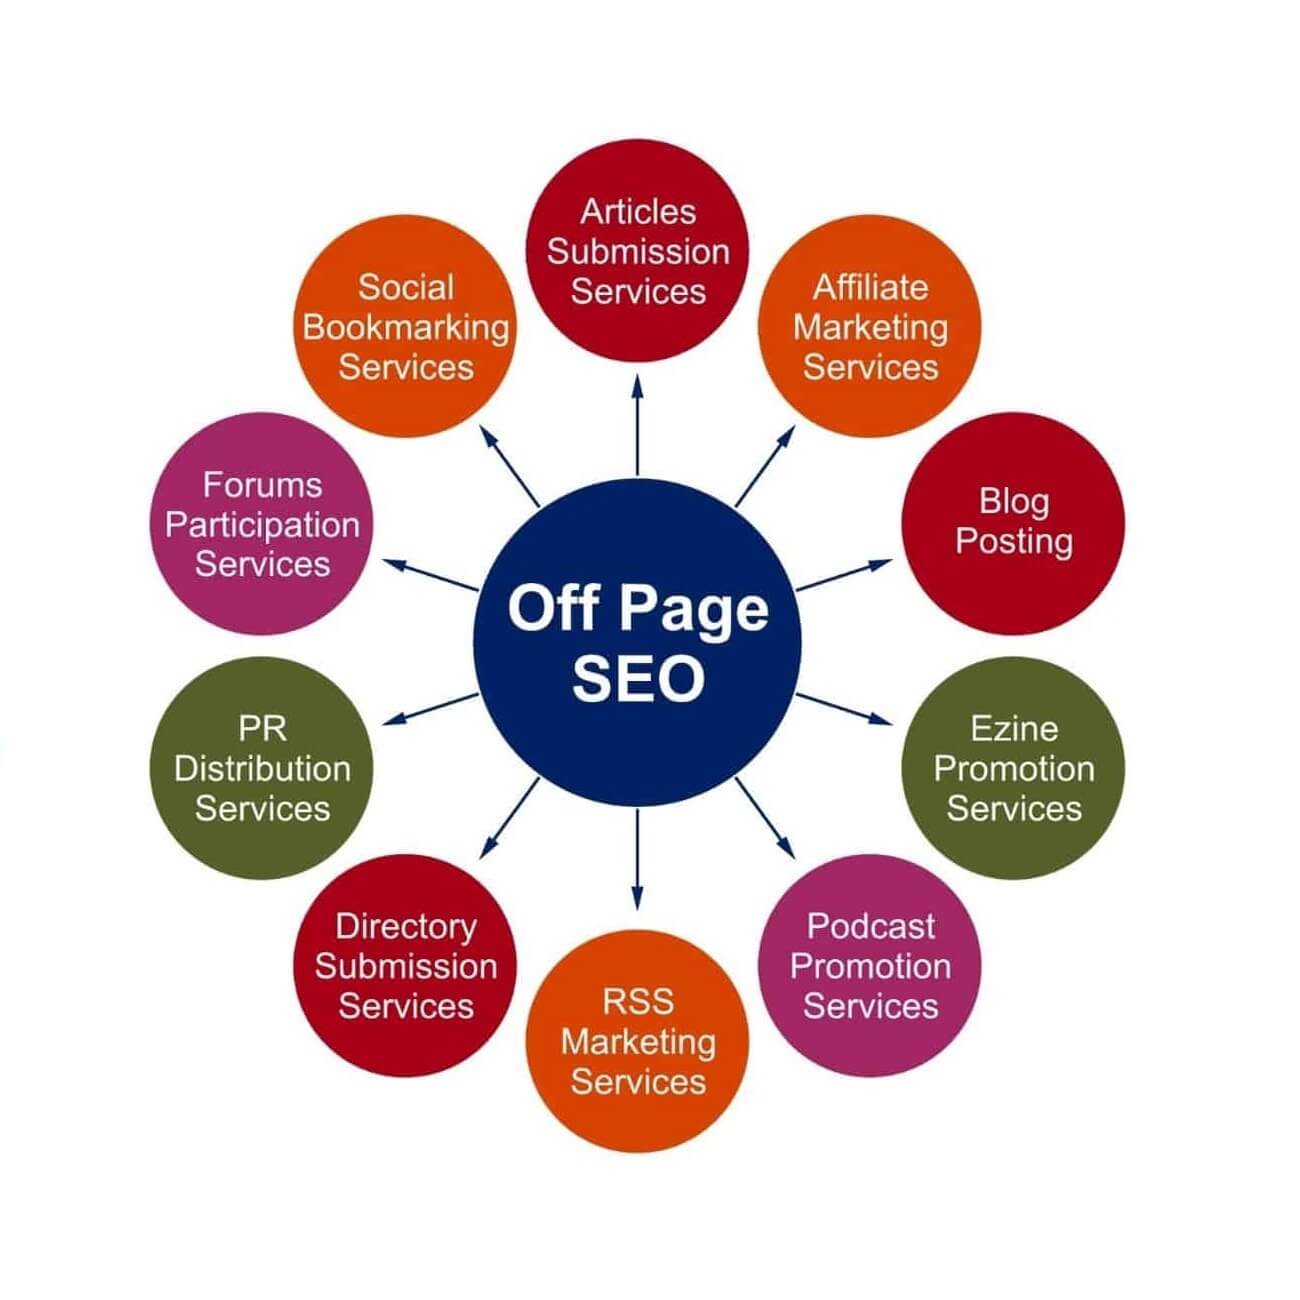 off-Page SEO